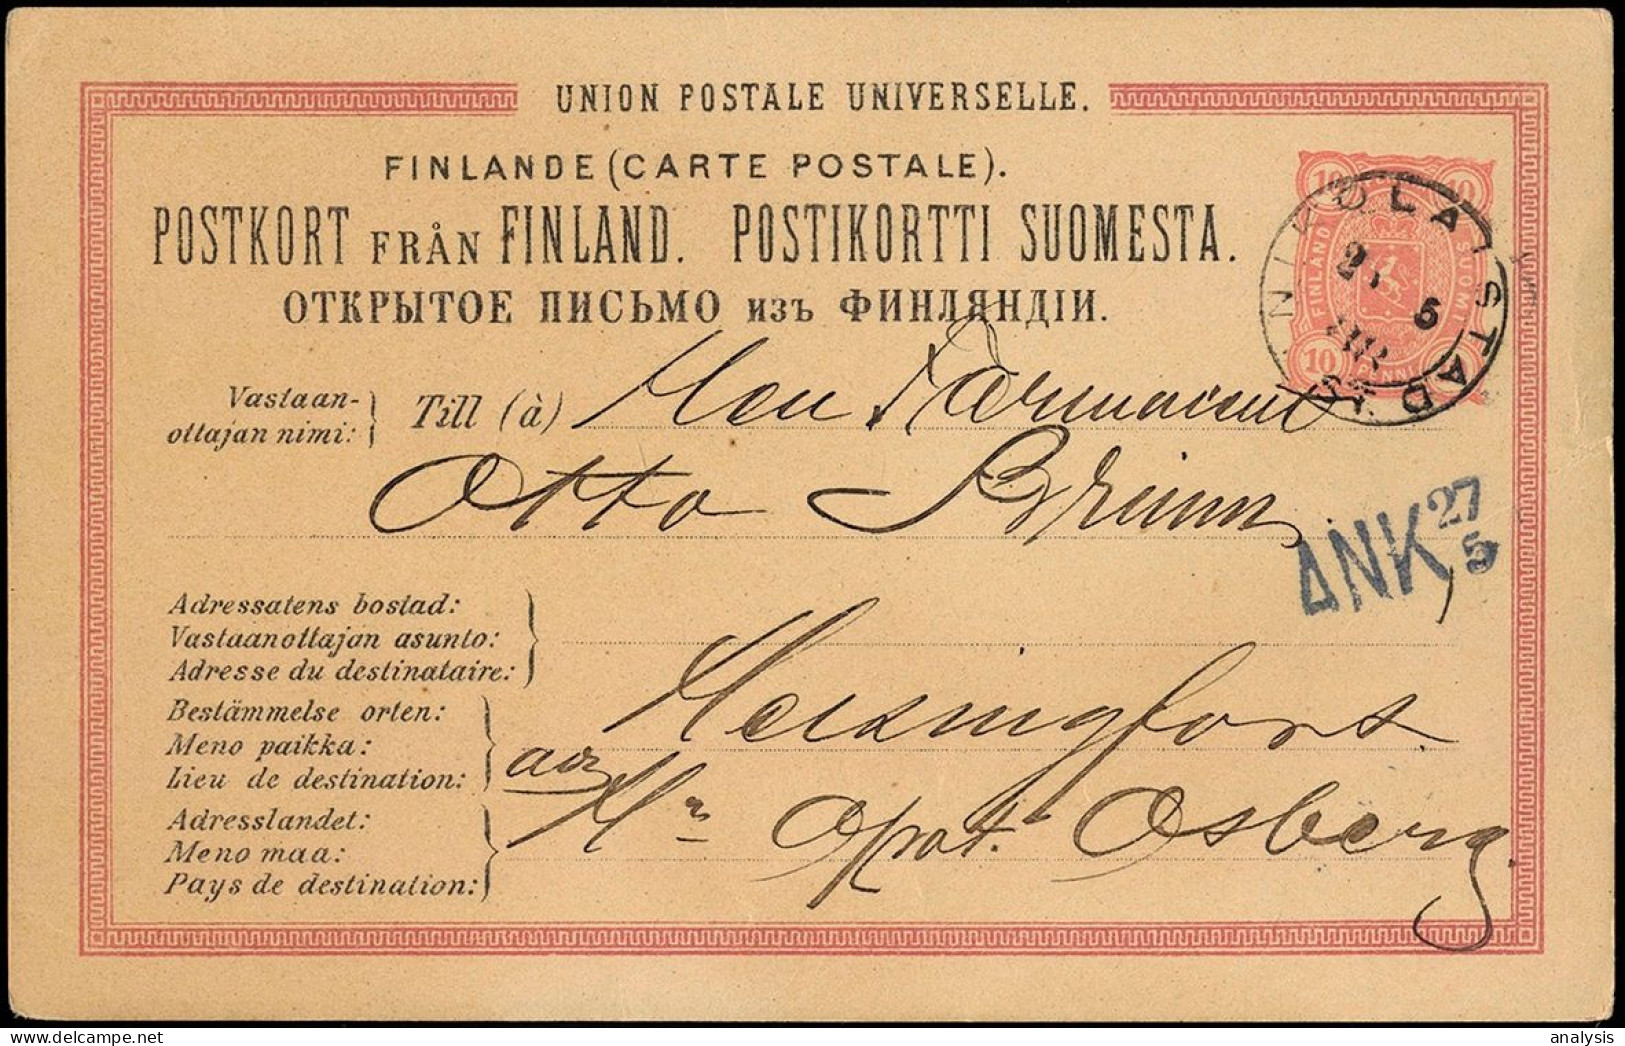 Finland Nikolaistad 10P Postal Stationery Card Mailed To Helsinki 1888. Russia Empire - Covers & Documents